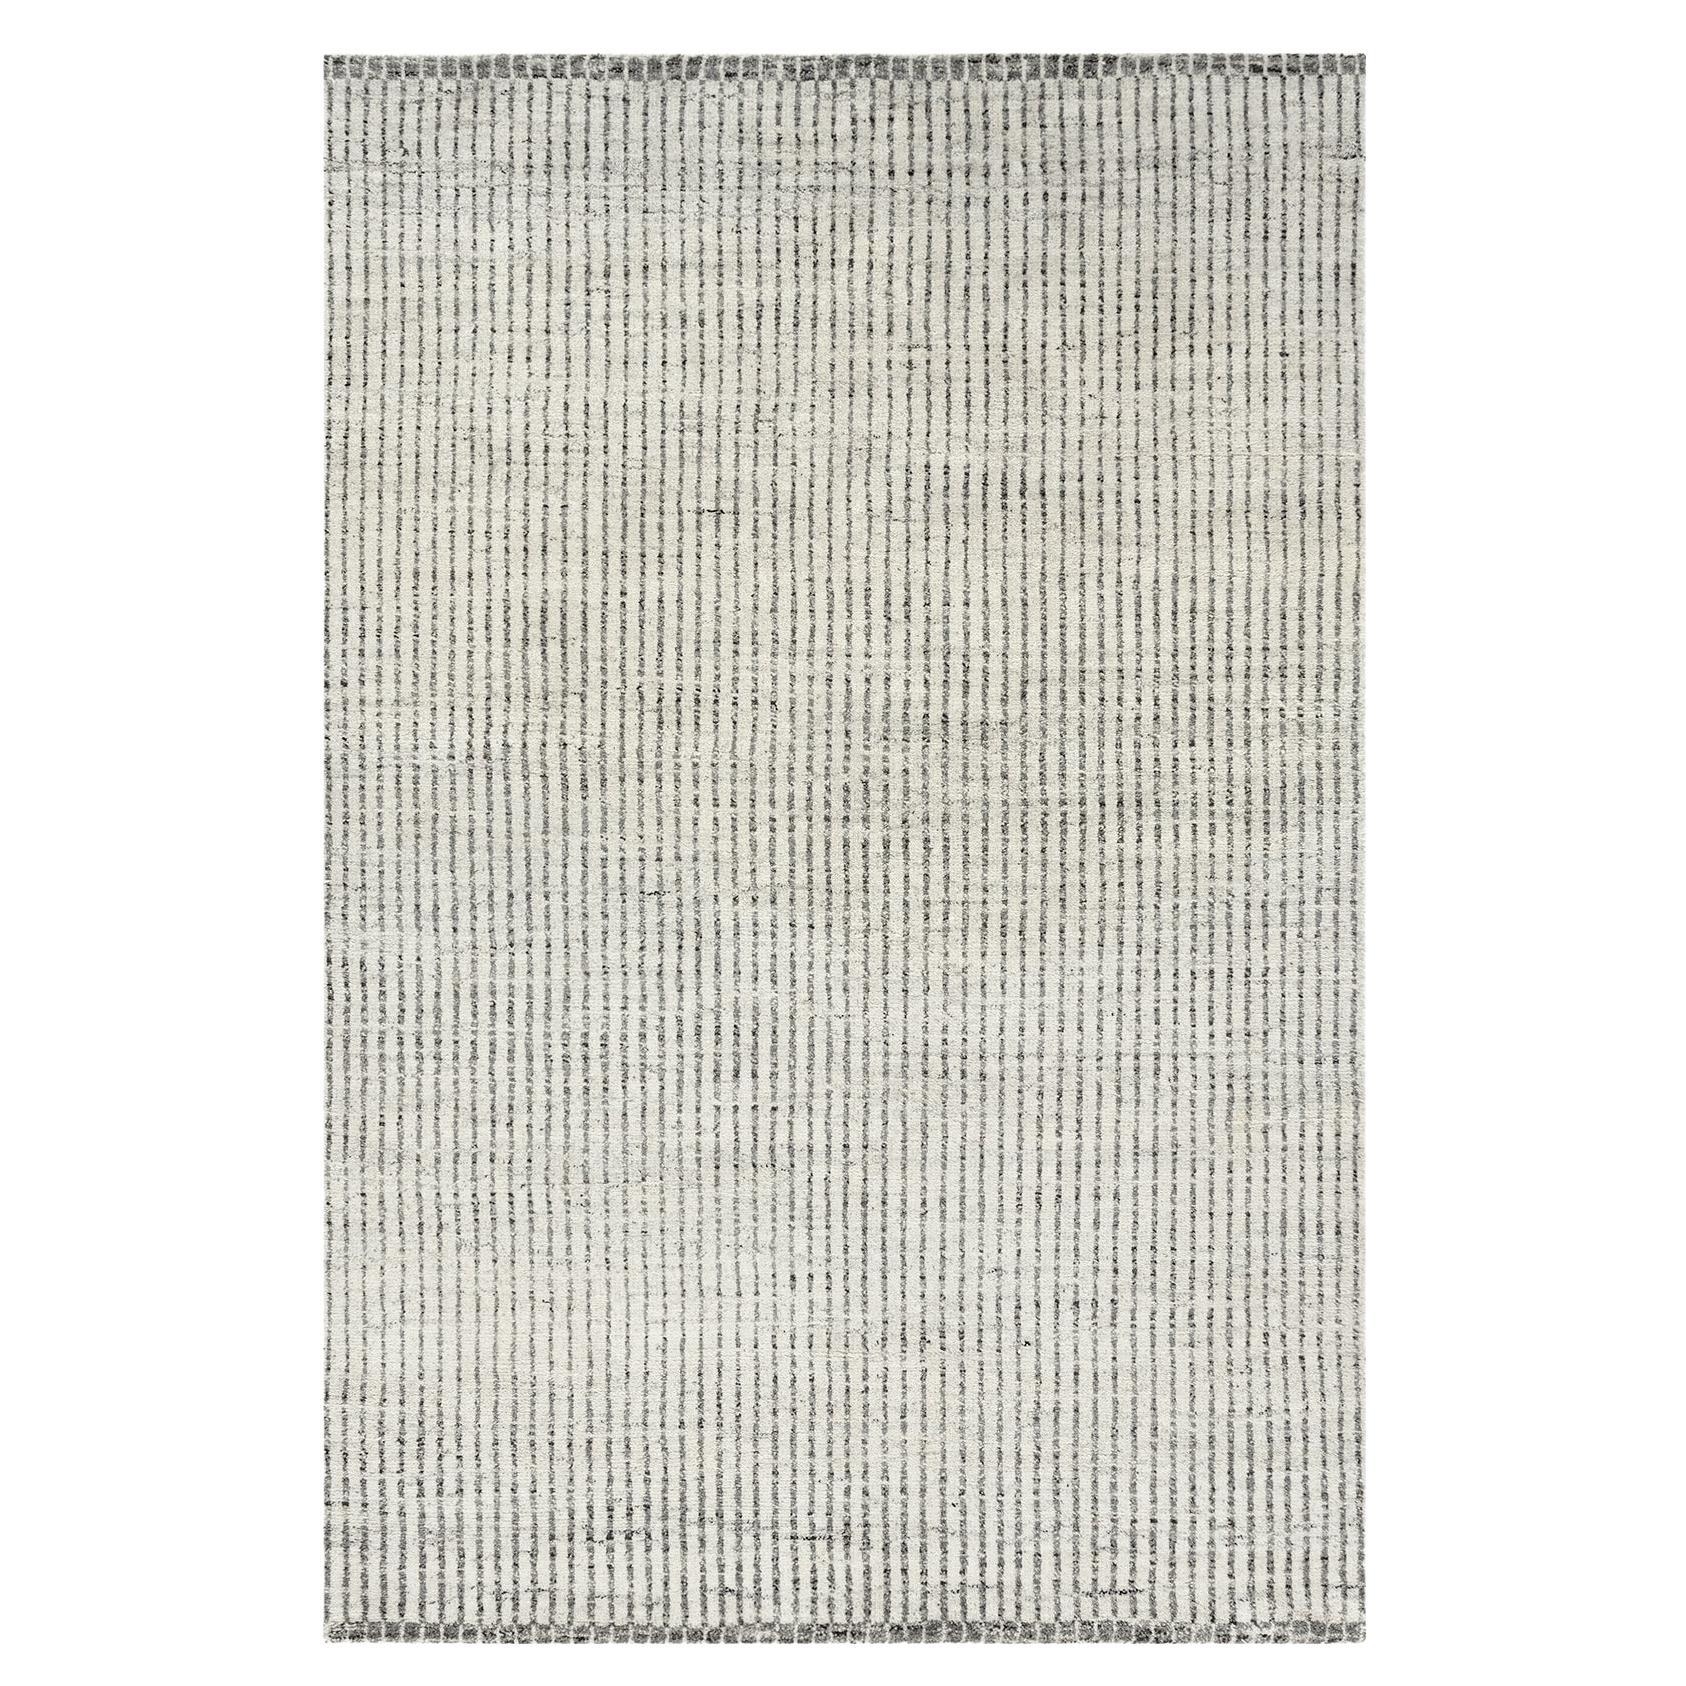 Organic Day Contemporary Rug 8' x 10' For Sale